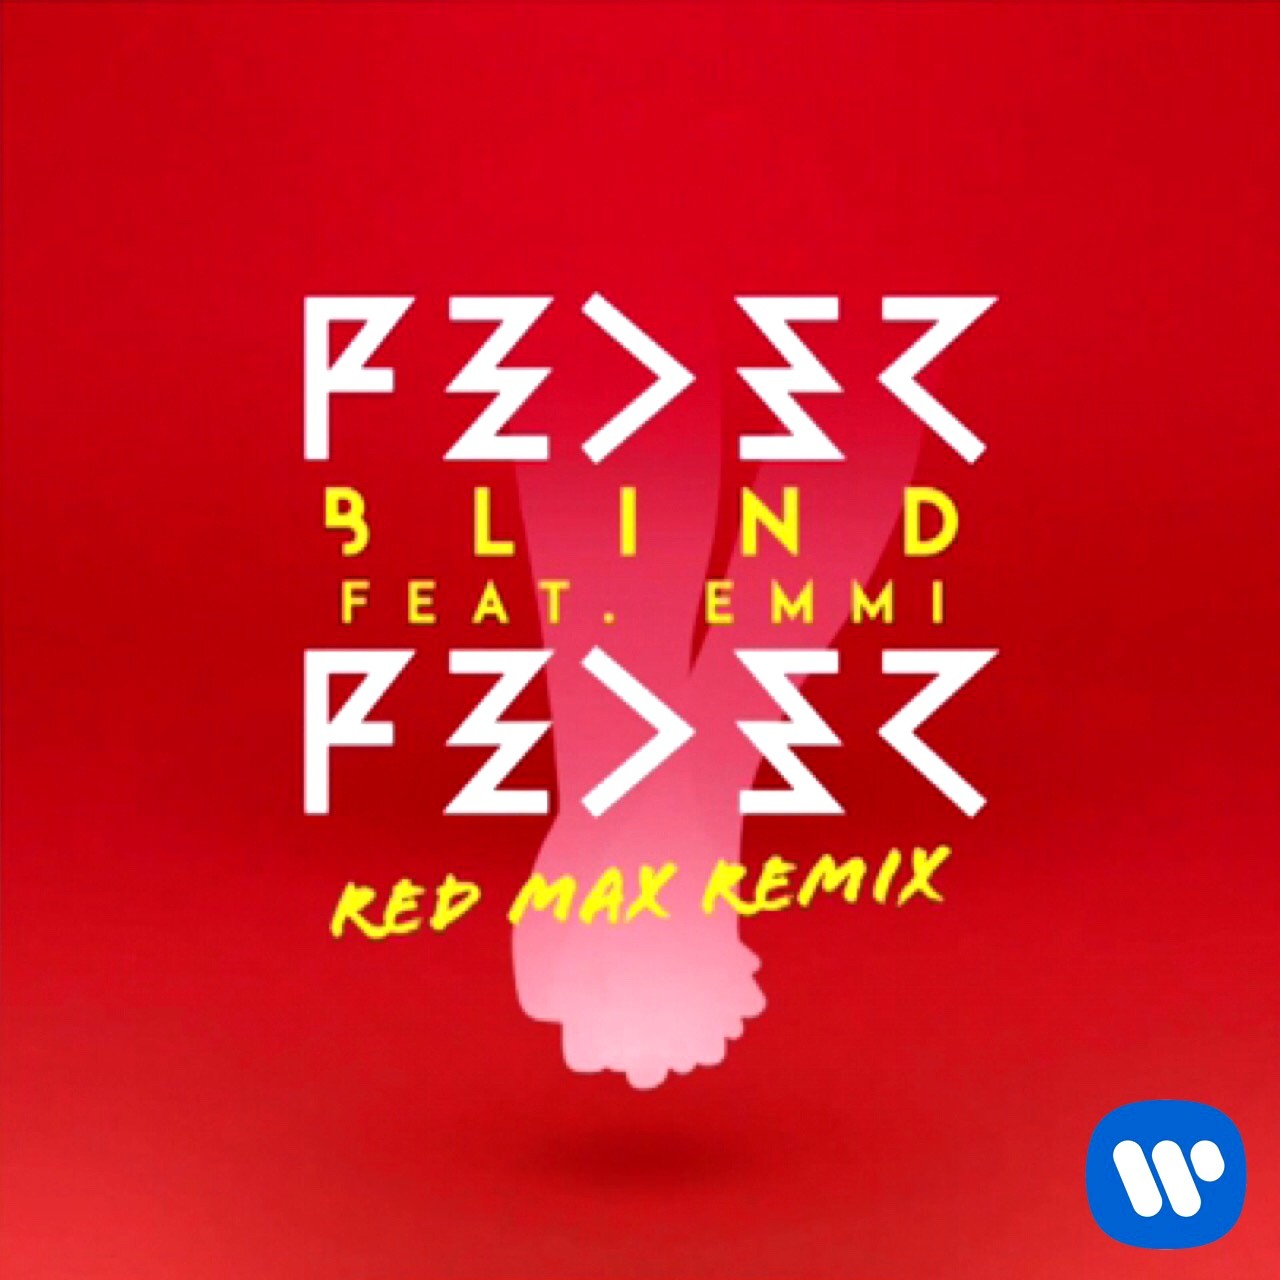 Feder ft. featuring EMMY Blind (Red Max Remix) cover artwork